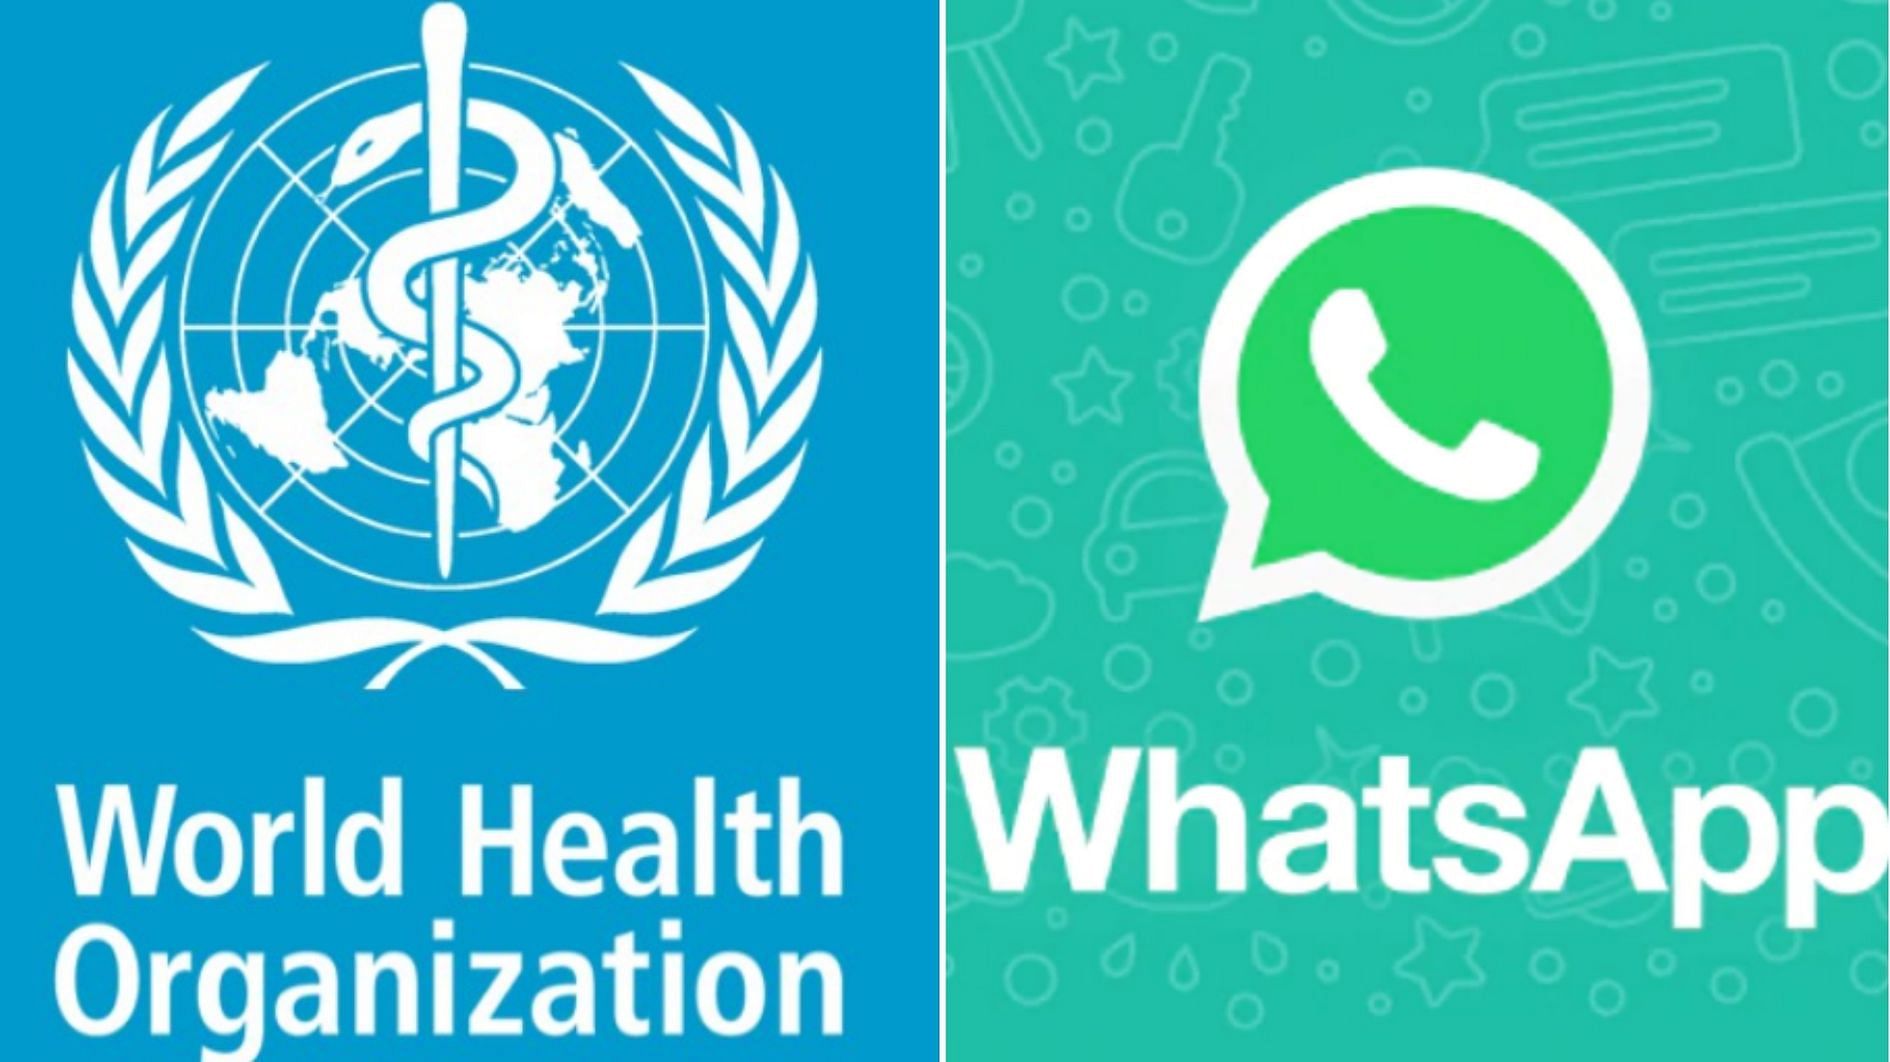 World Health Organization (WHO) has partnered with WhatsApp to provide real-time health information to users across the globe.